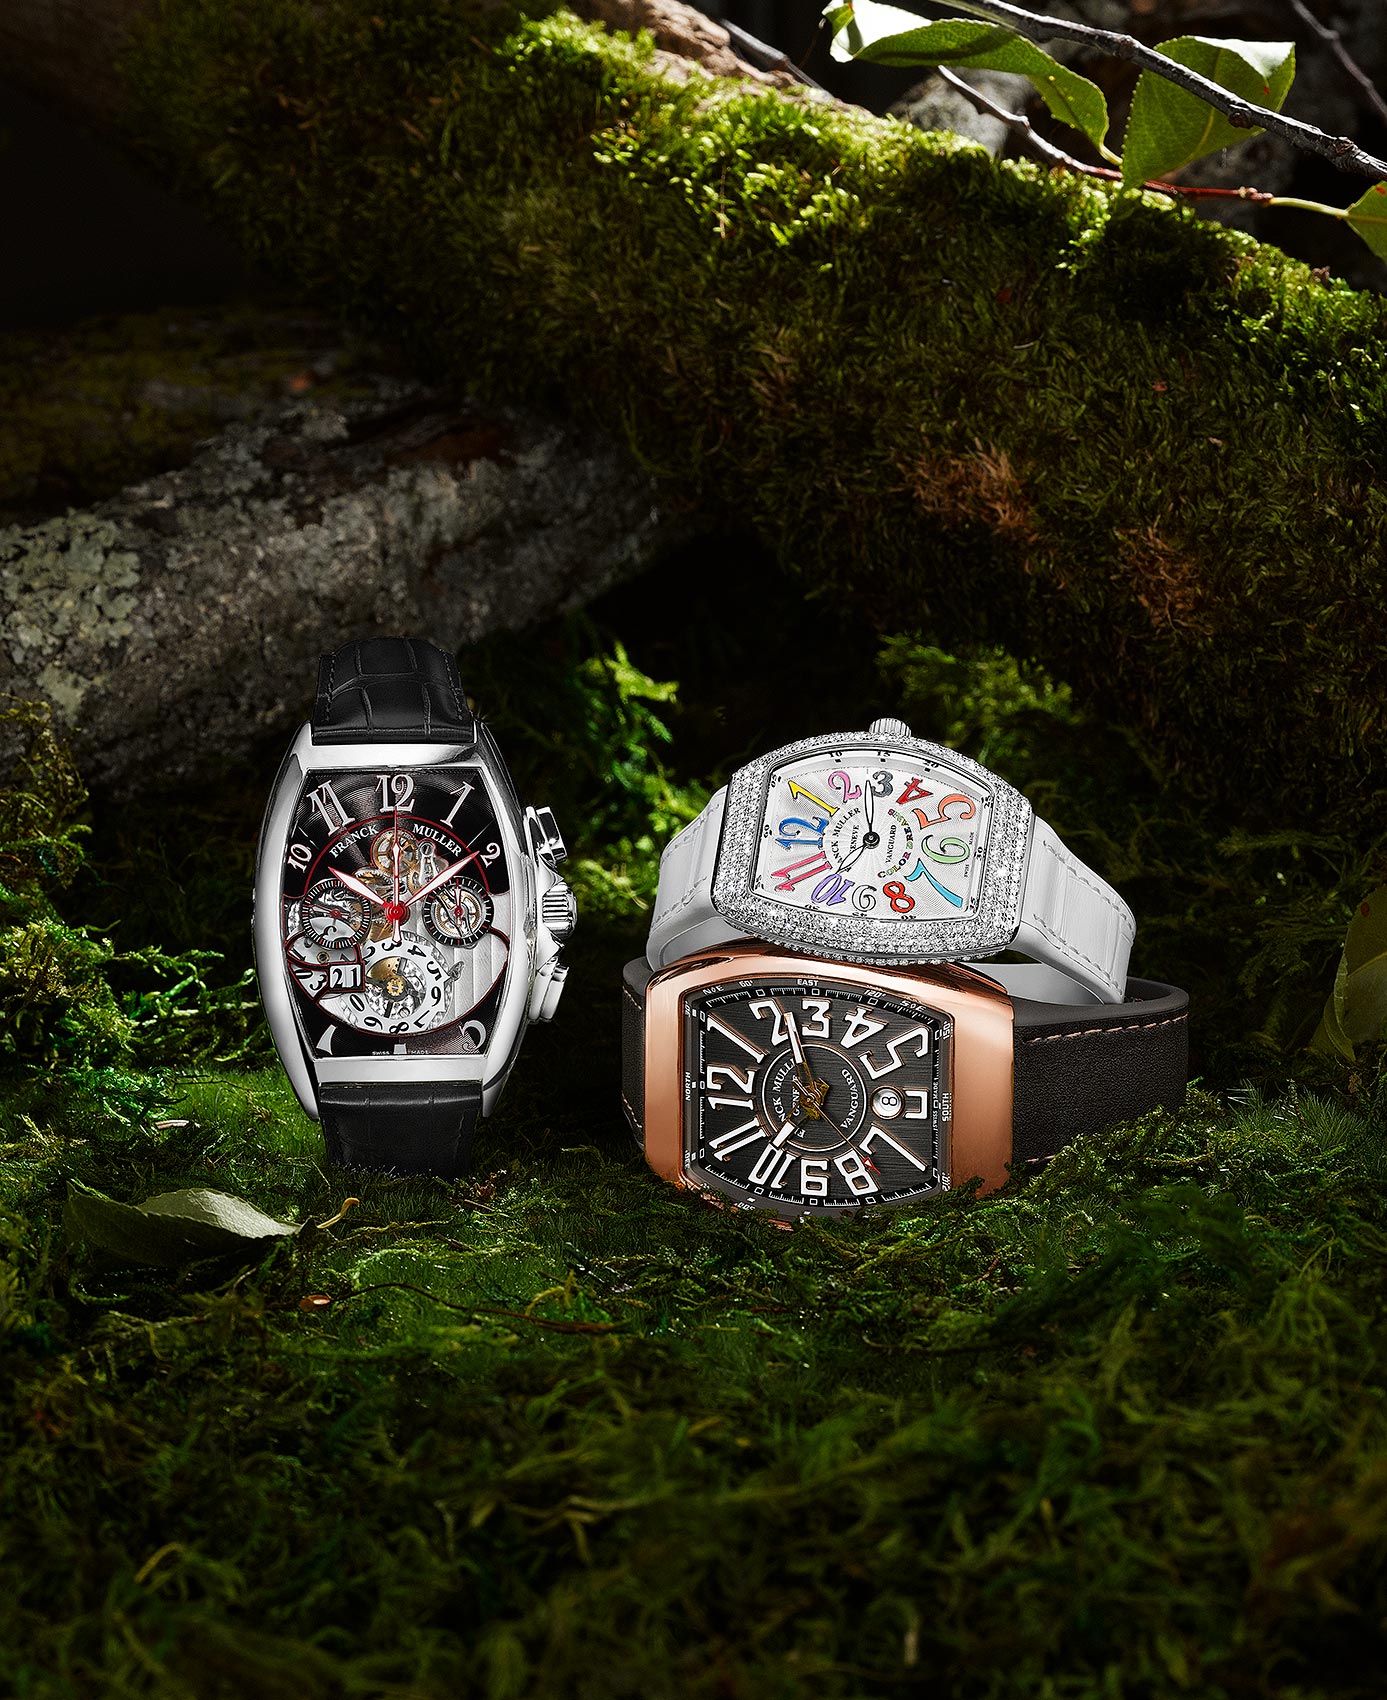 Frank Muller Timepieces in the Forrest